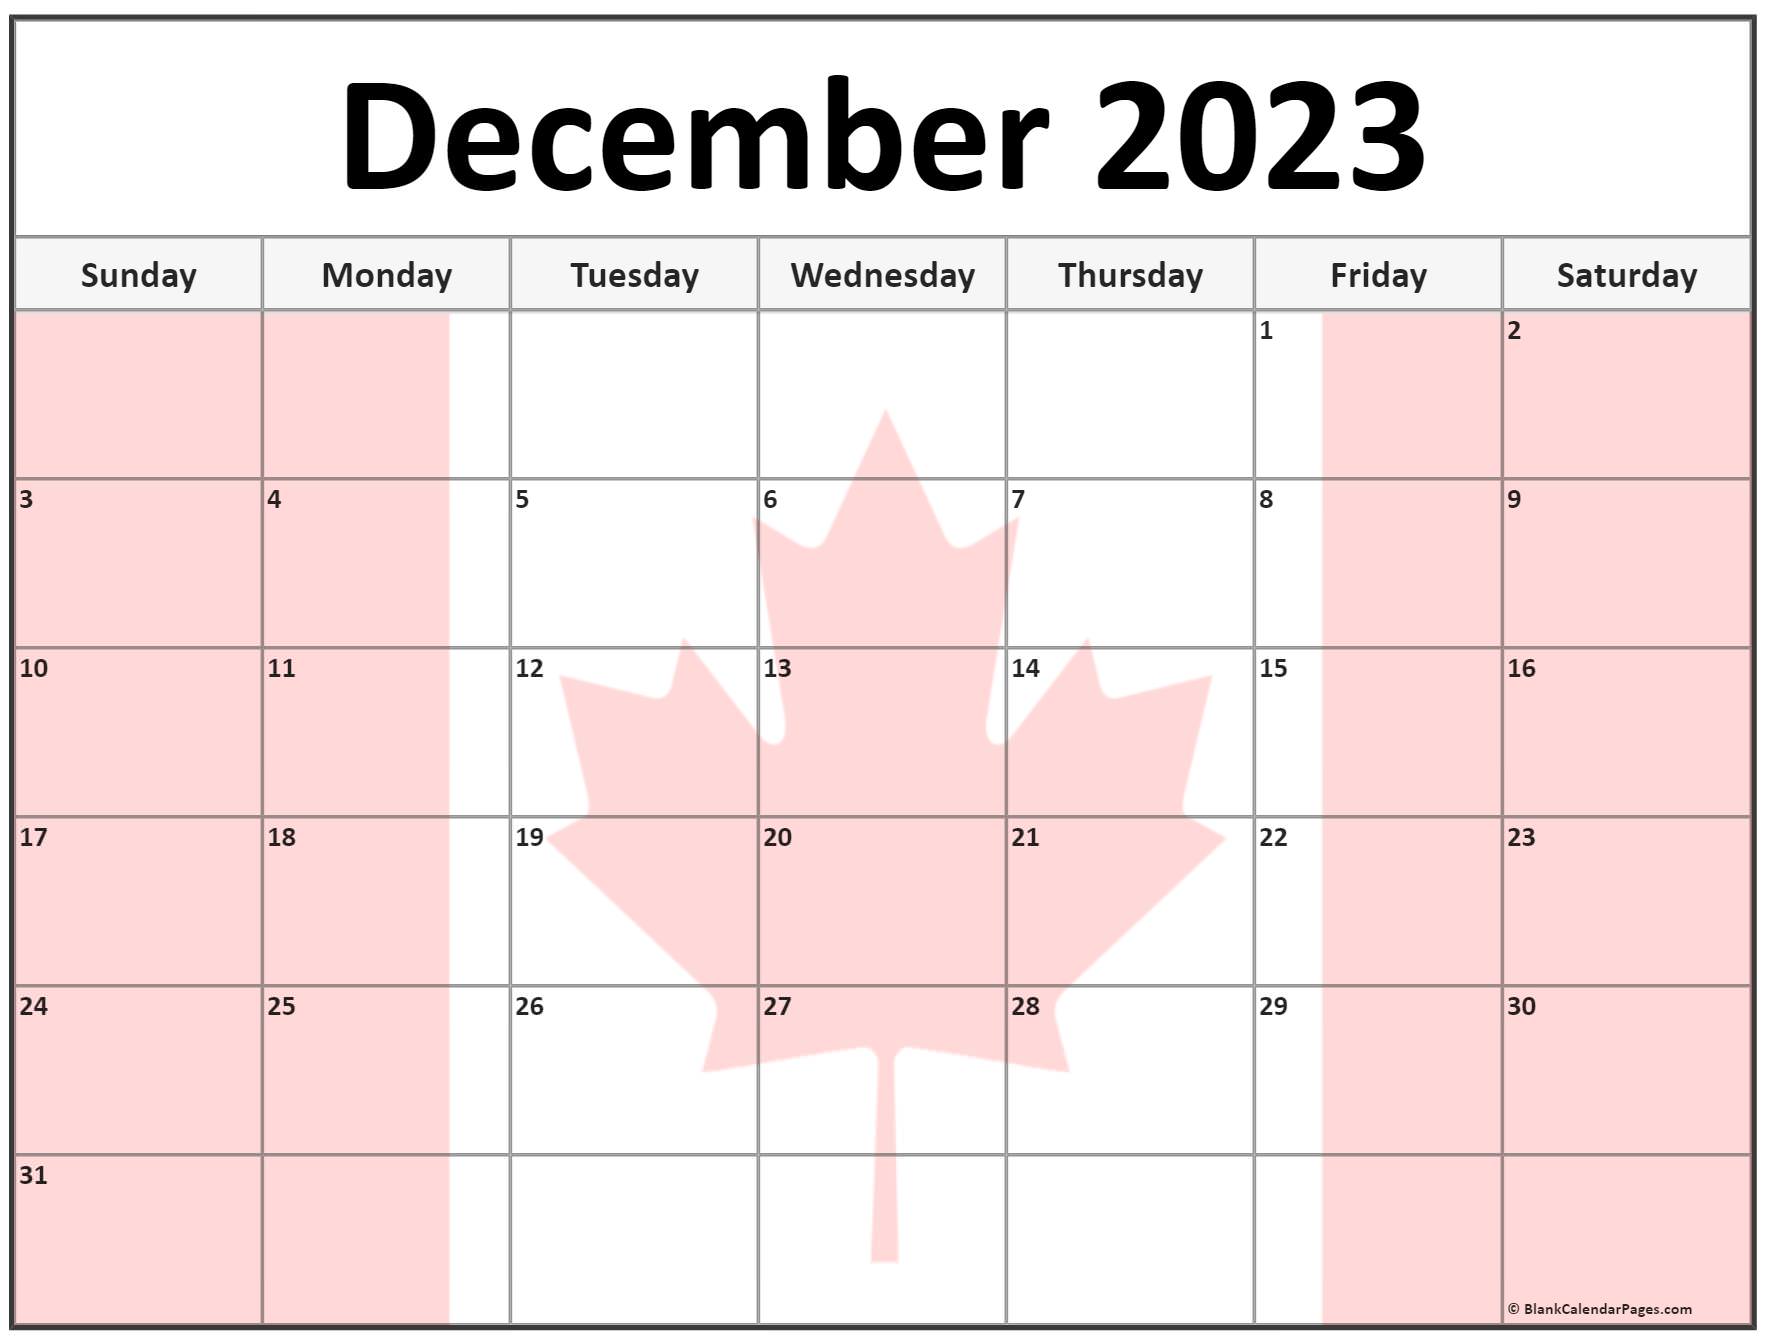 Collection of December 2023 photo calendars with image filters.